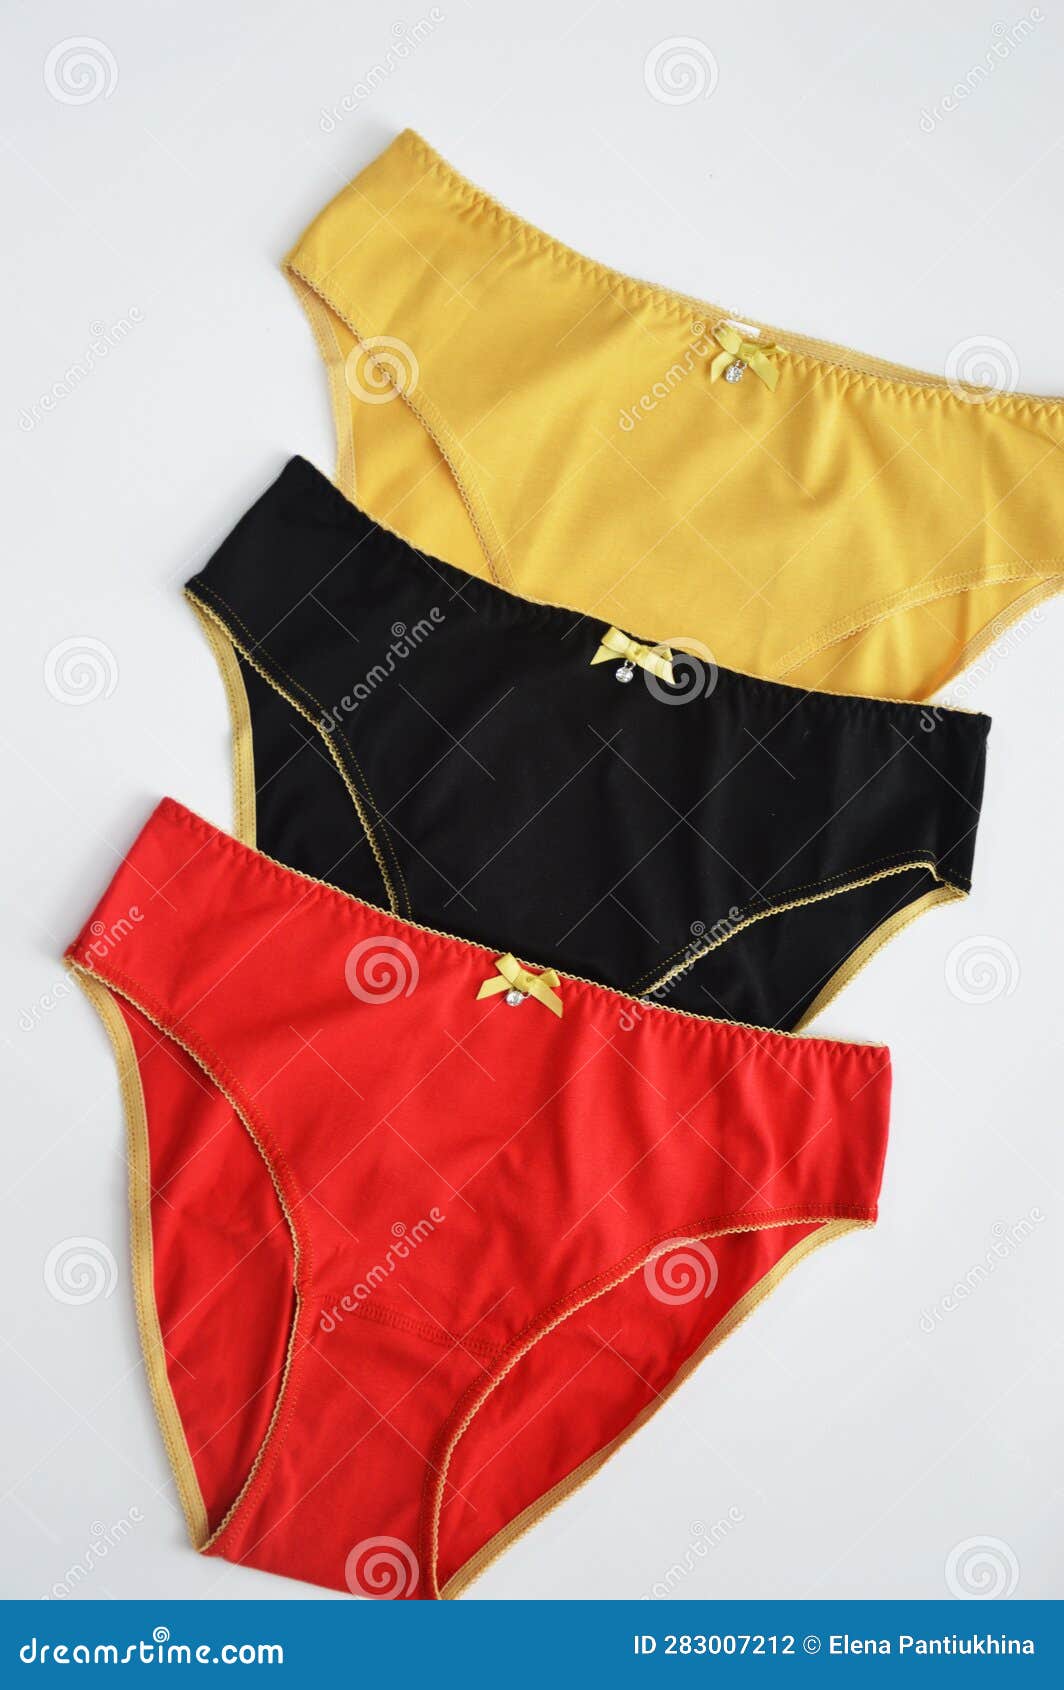 Lingerie. Set of Women S Colored Cotton Panties on a White Background ...